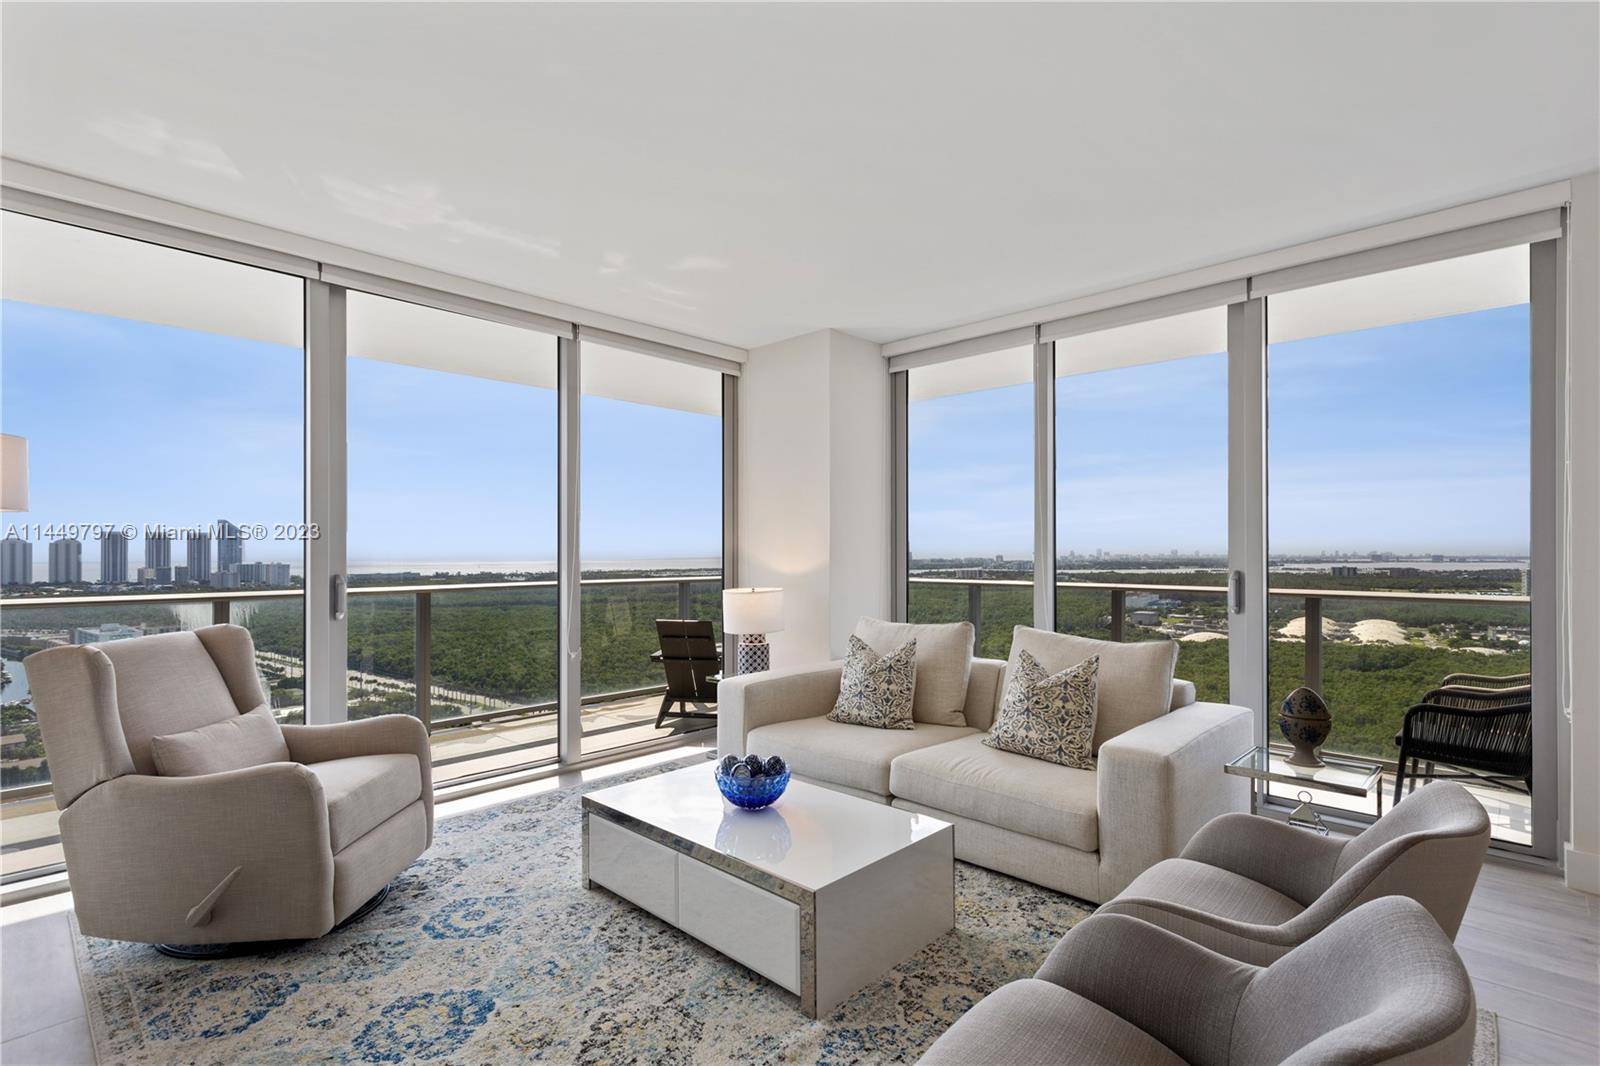 COMPLEX AT THE HARBOUR, WITH VERY HIGH END FINISHED, SPACIOUS 3 BEDROOM 3 BATHROOM, WITH PRIVATE ELEVATOR AND BREATHTAKING VIEWS OF OLETA PARK WATER VIEW AND MIAMI SKYLINE.